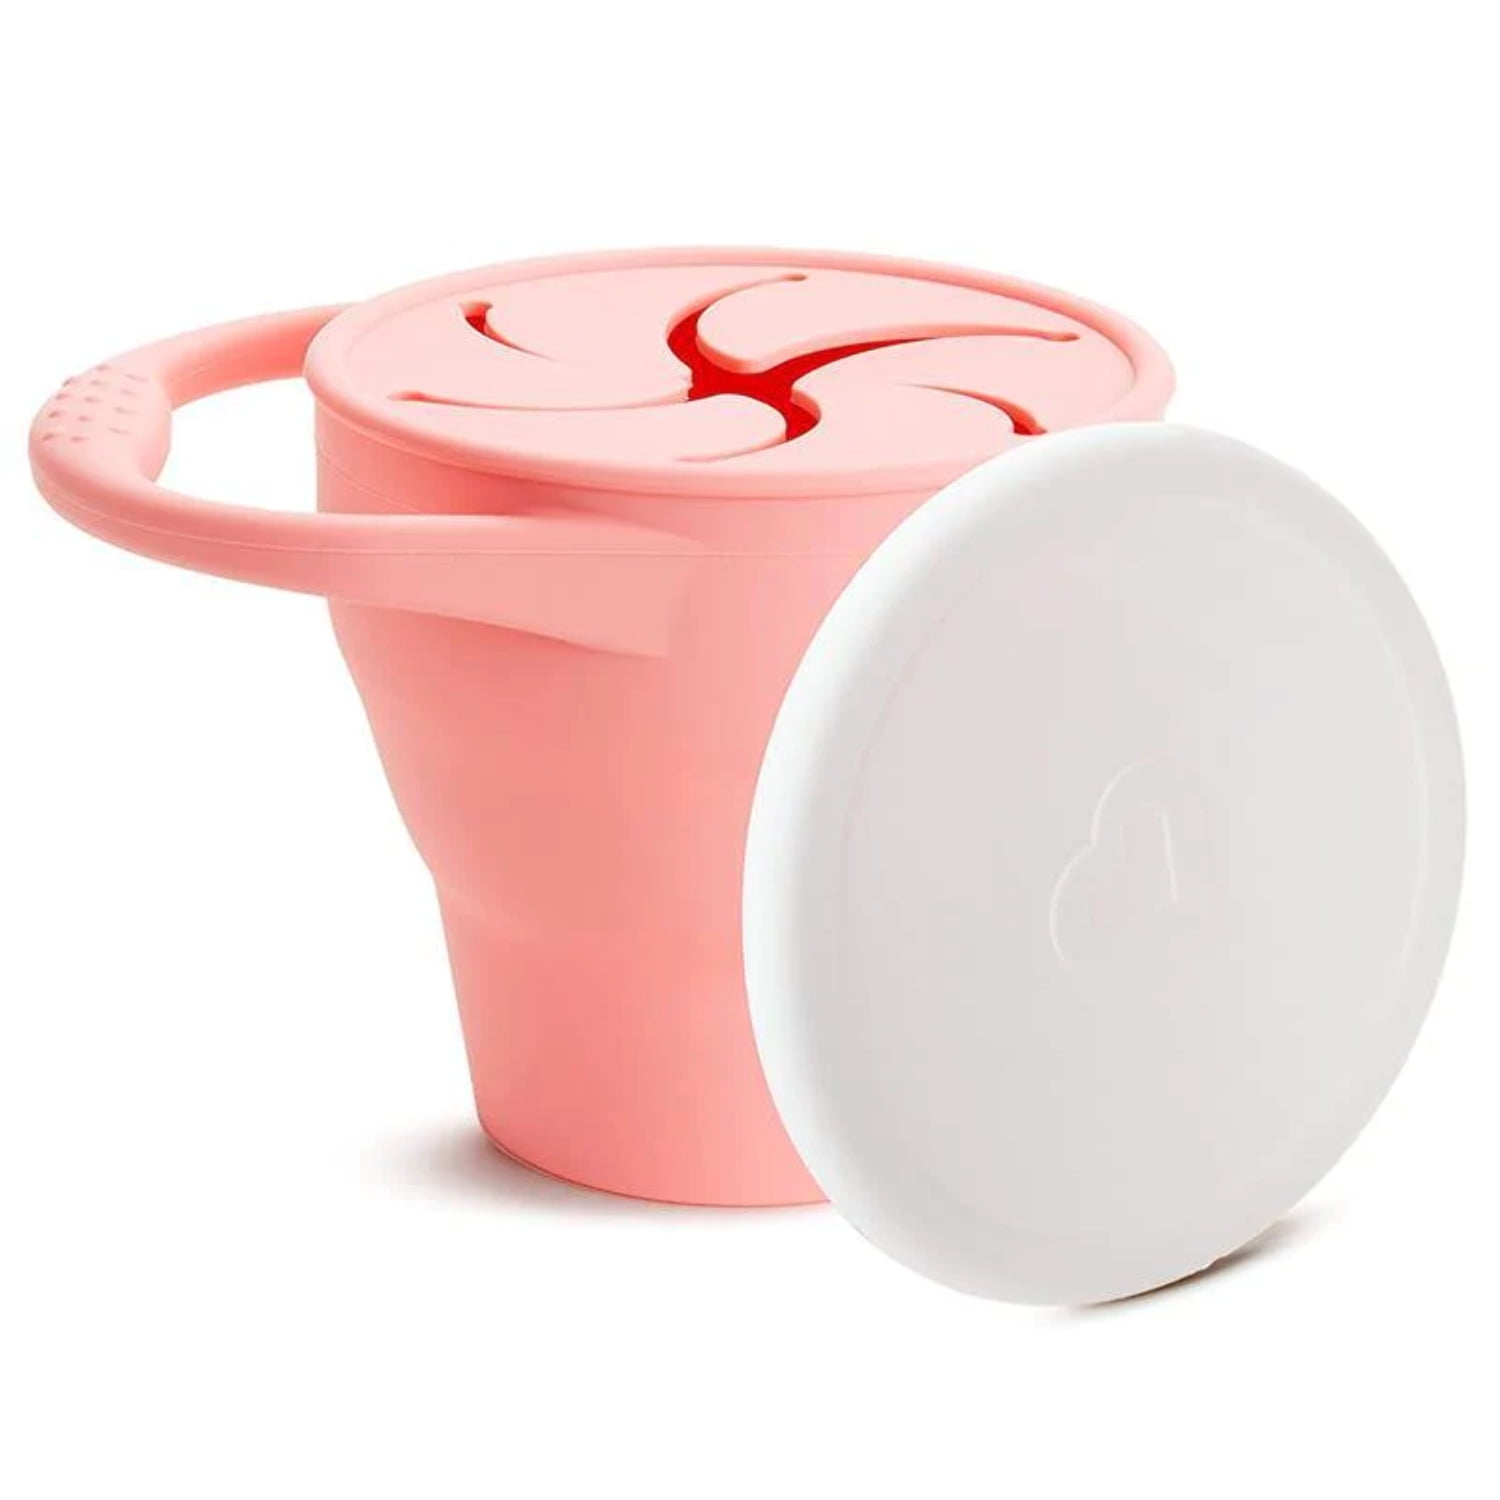 Munchkin - C’est Silicone! Collapsible Snack Catcher with Lid, Coral